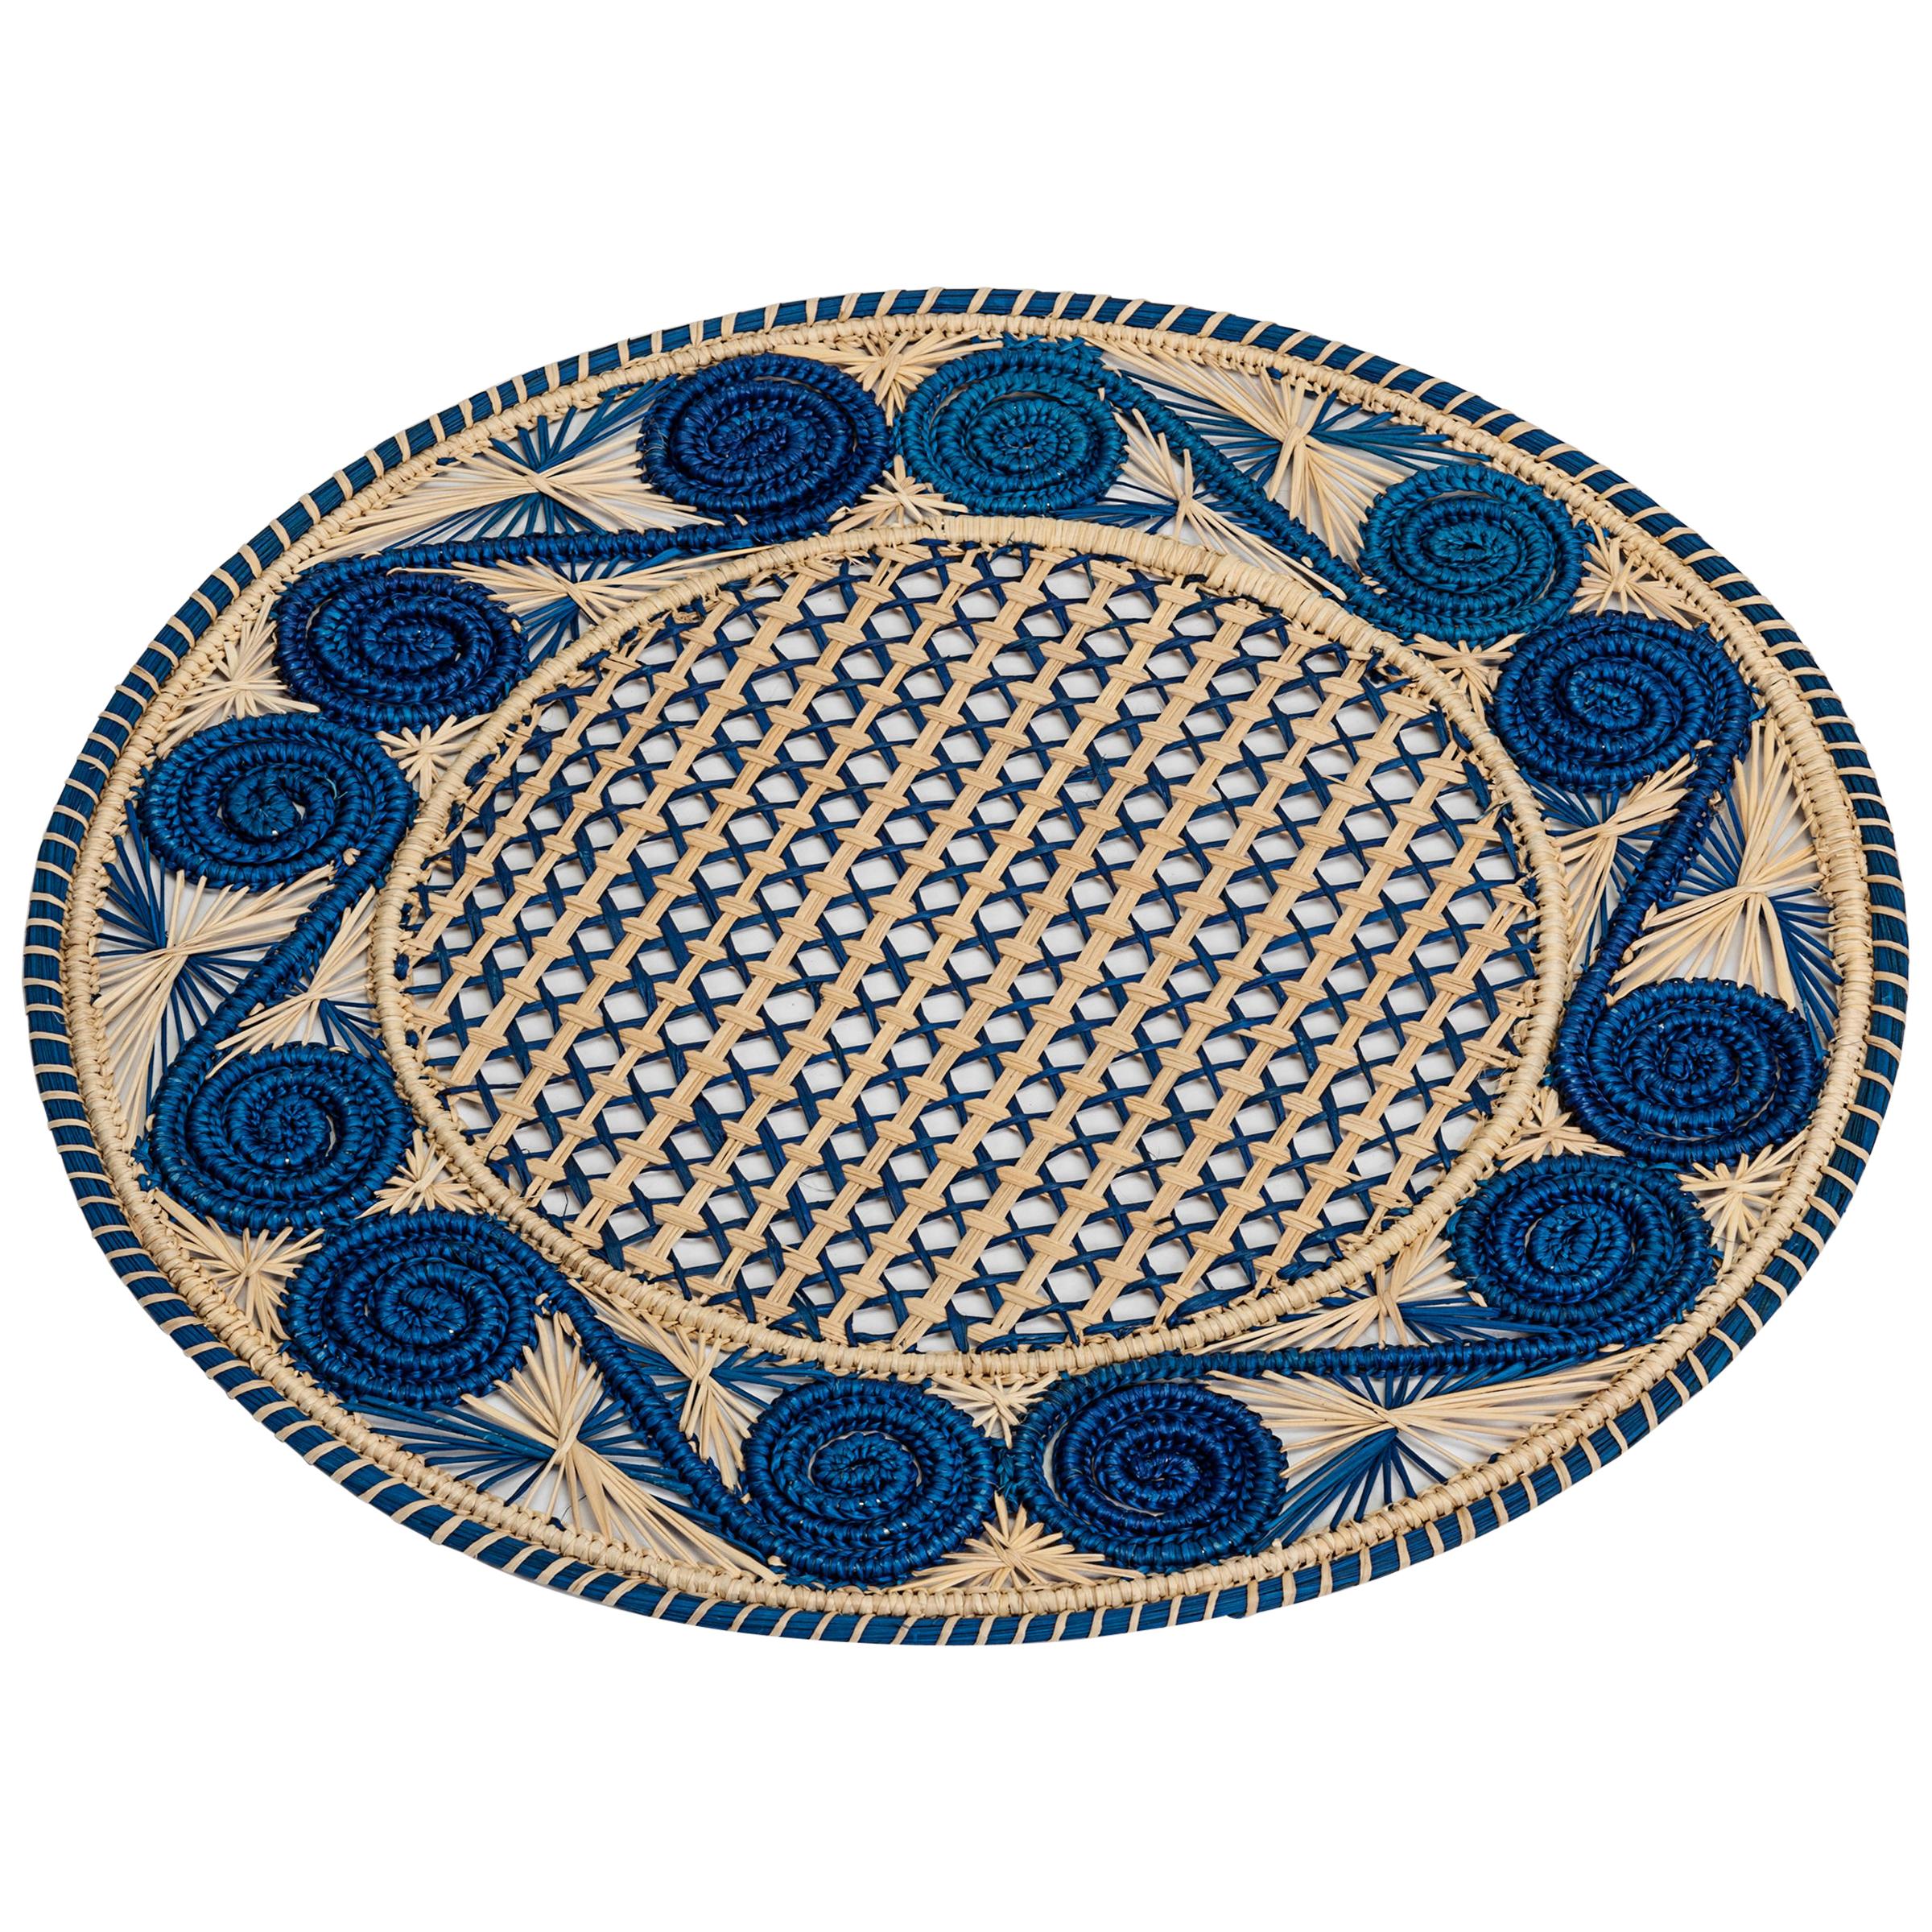 Handwoven Blue and Cream Iraca Fibre Placemat’s’ Made in Colombia